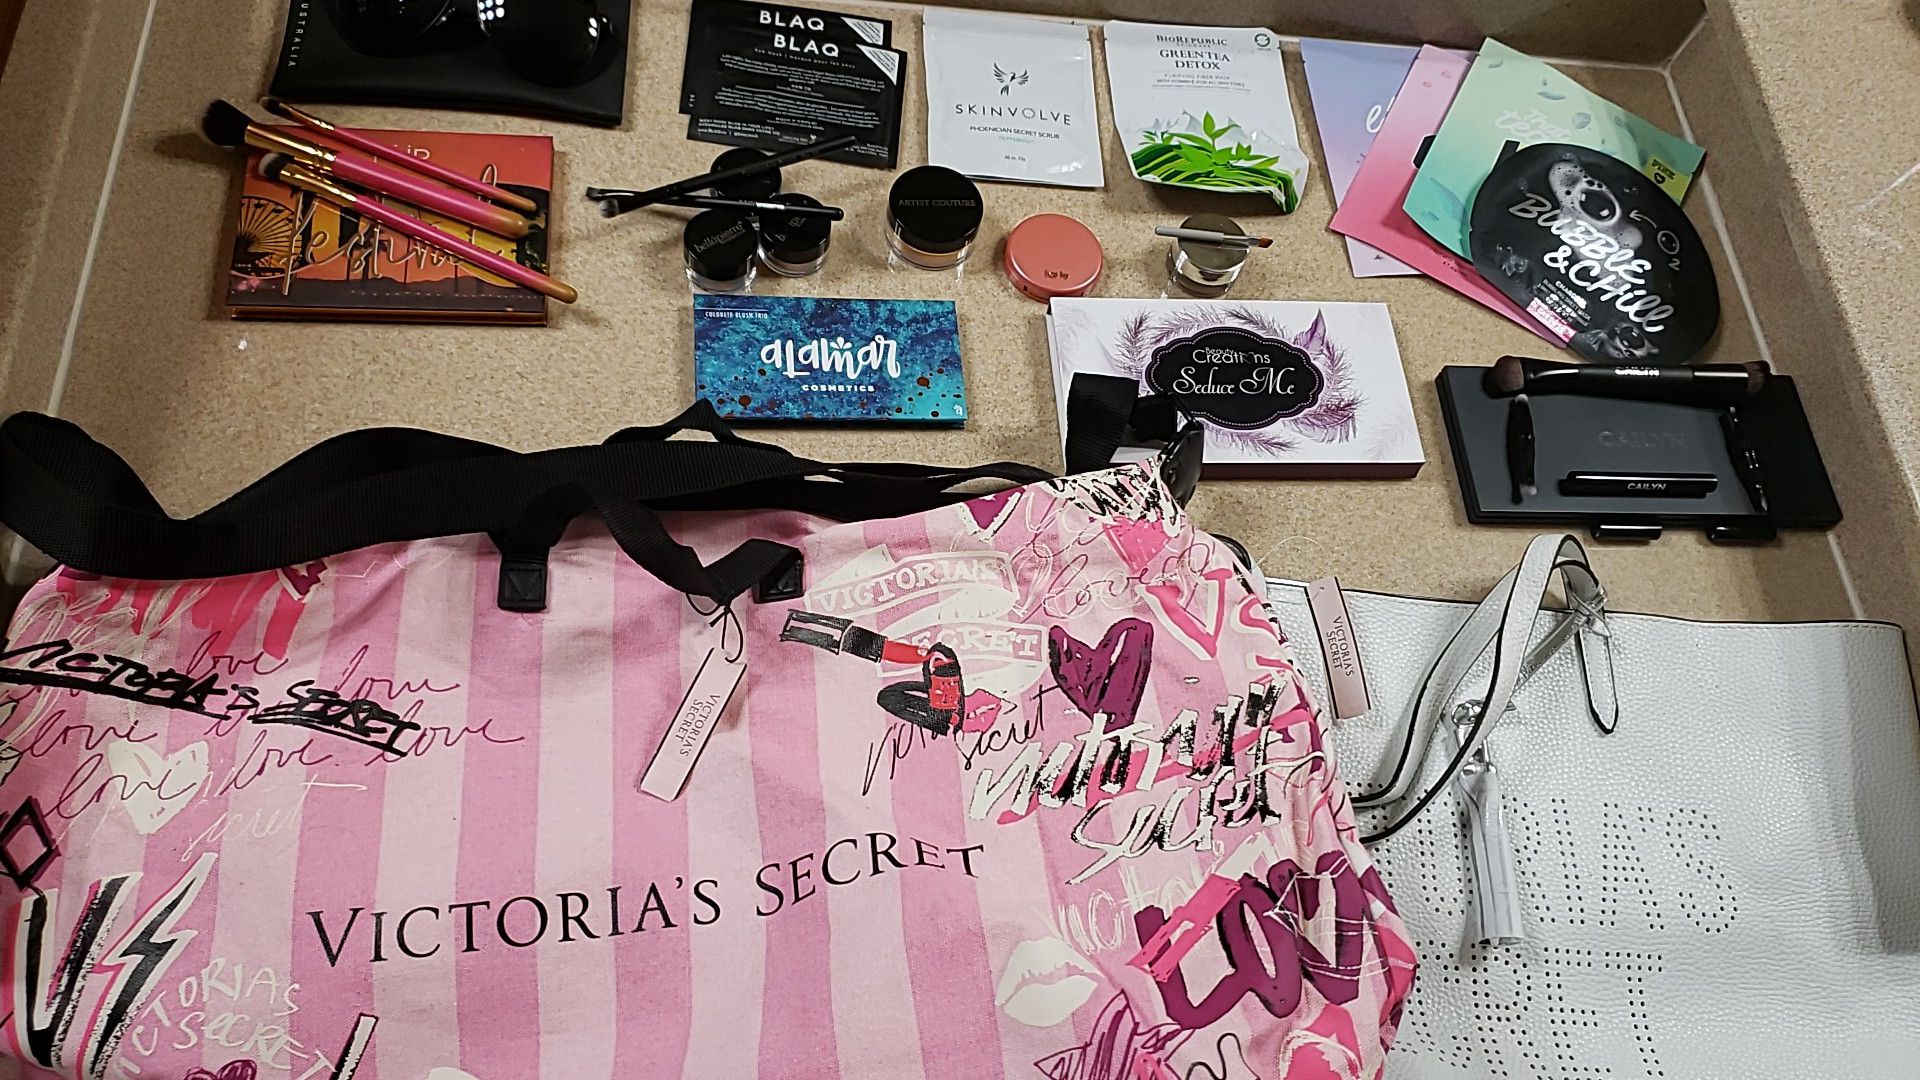 Brand new makeup with 2 Victoria Secret totes bags